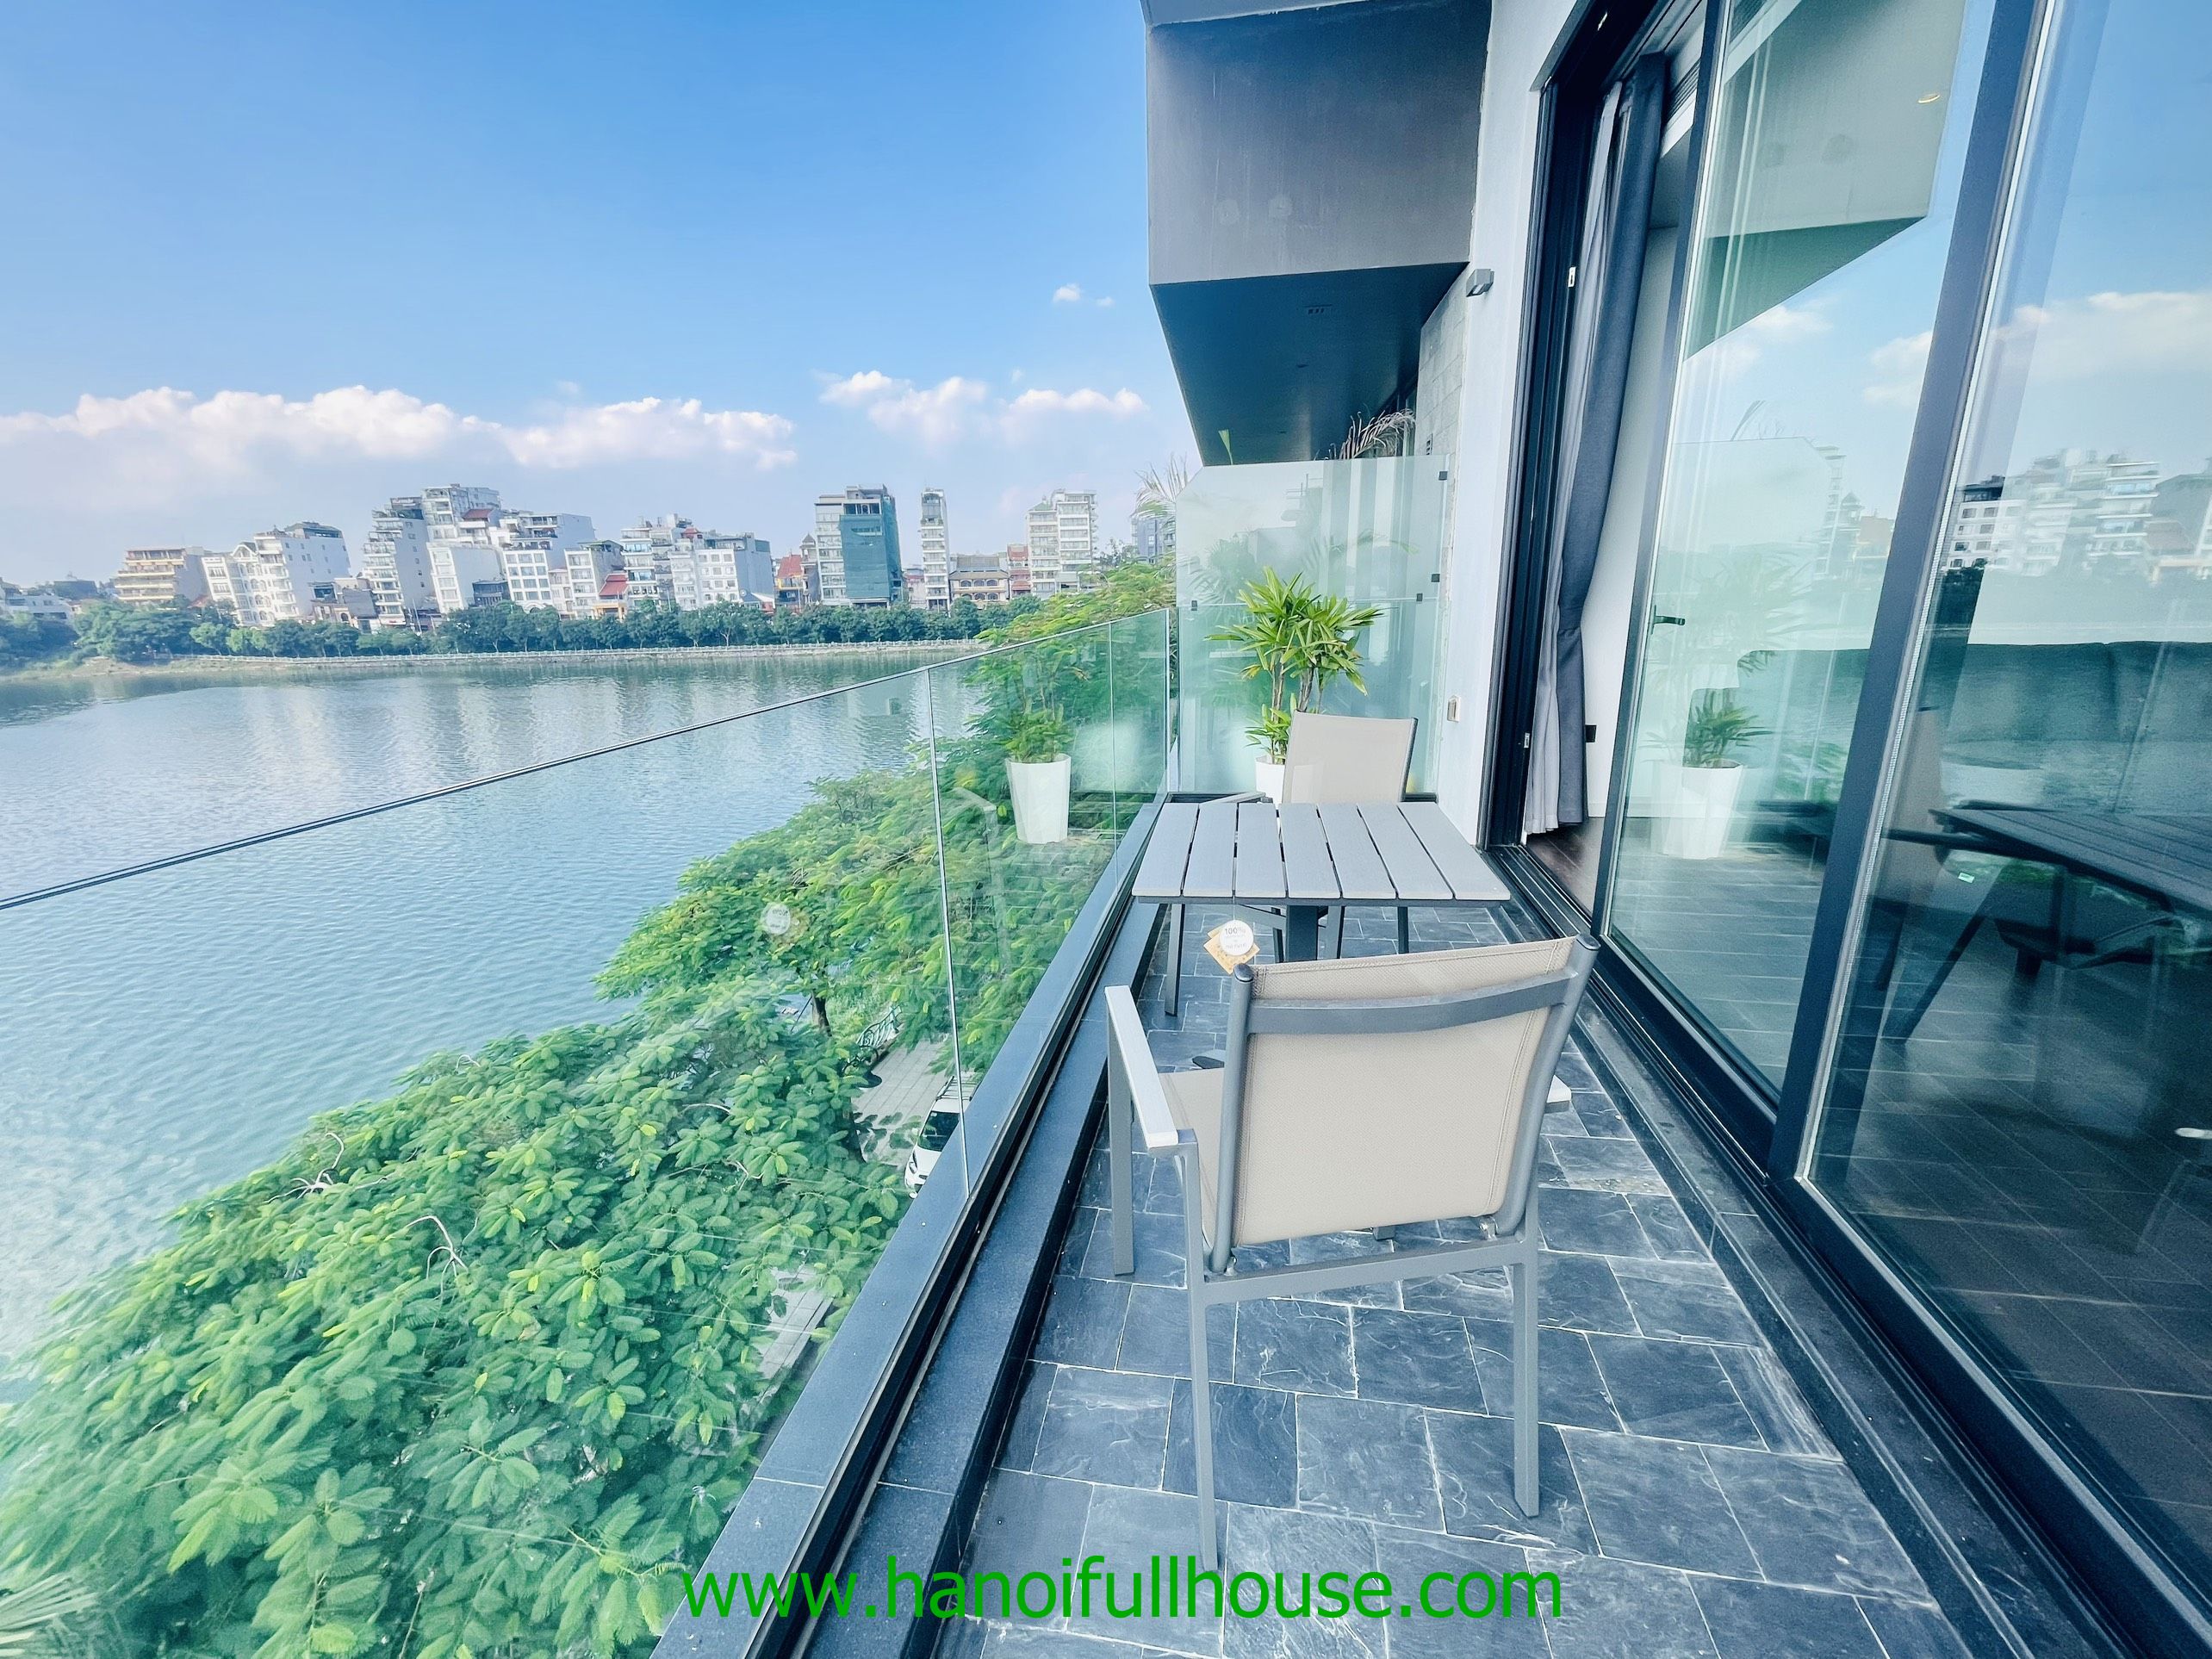 Lake view 2 bedroom apartment for rent in Tay Ho near Sheraton hotel.